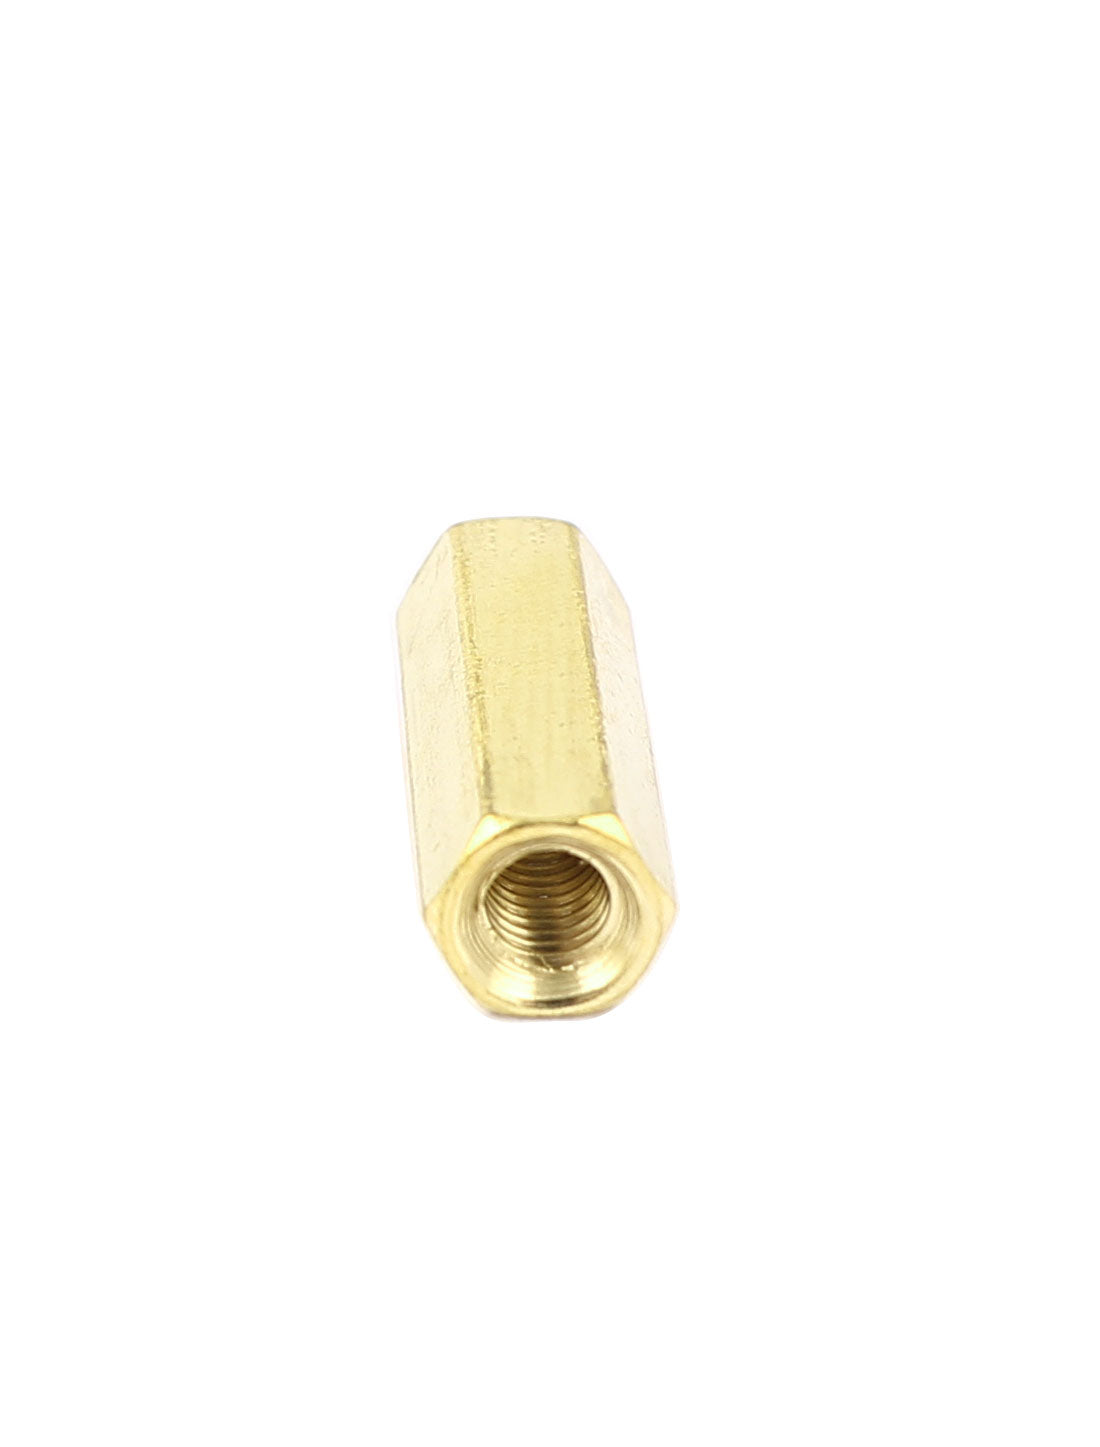 uxcell Uxcell M3 x 15mm Female/Female Thread Brass Hex Standoff PCB Pillar Spacer 10pcs